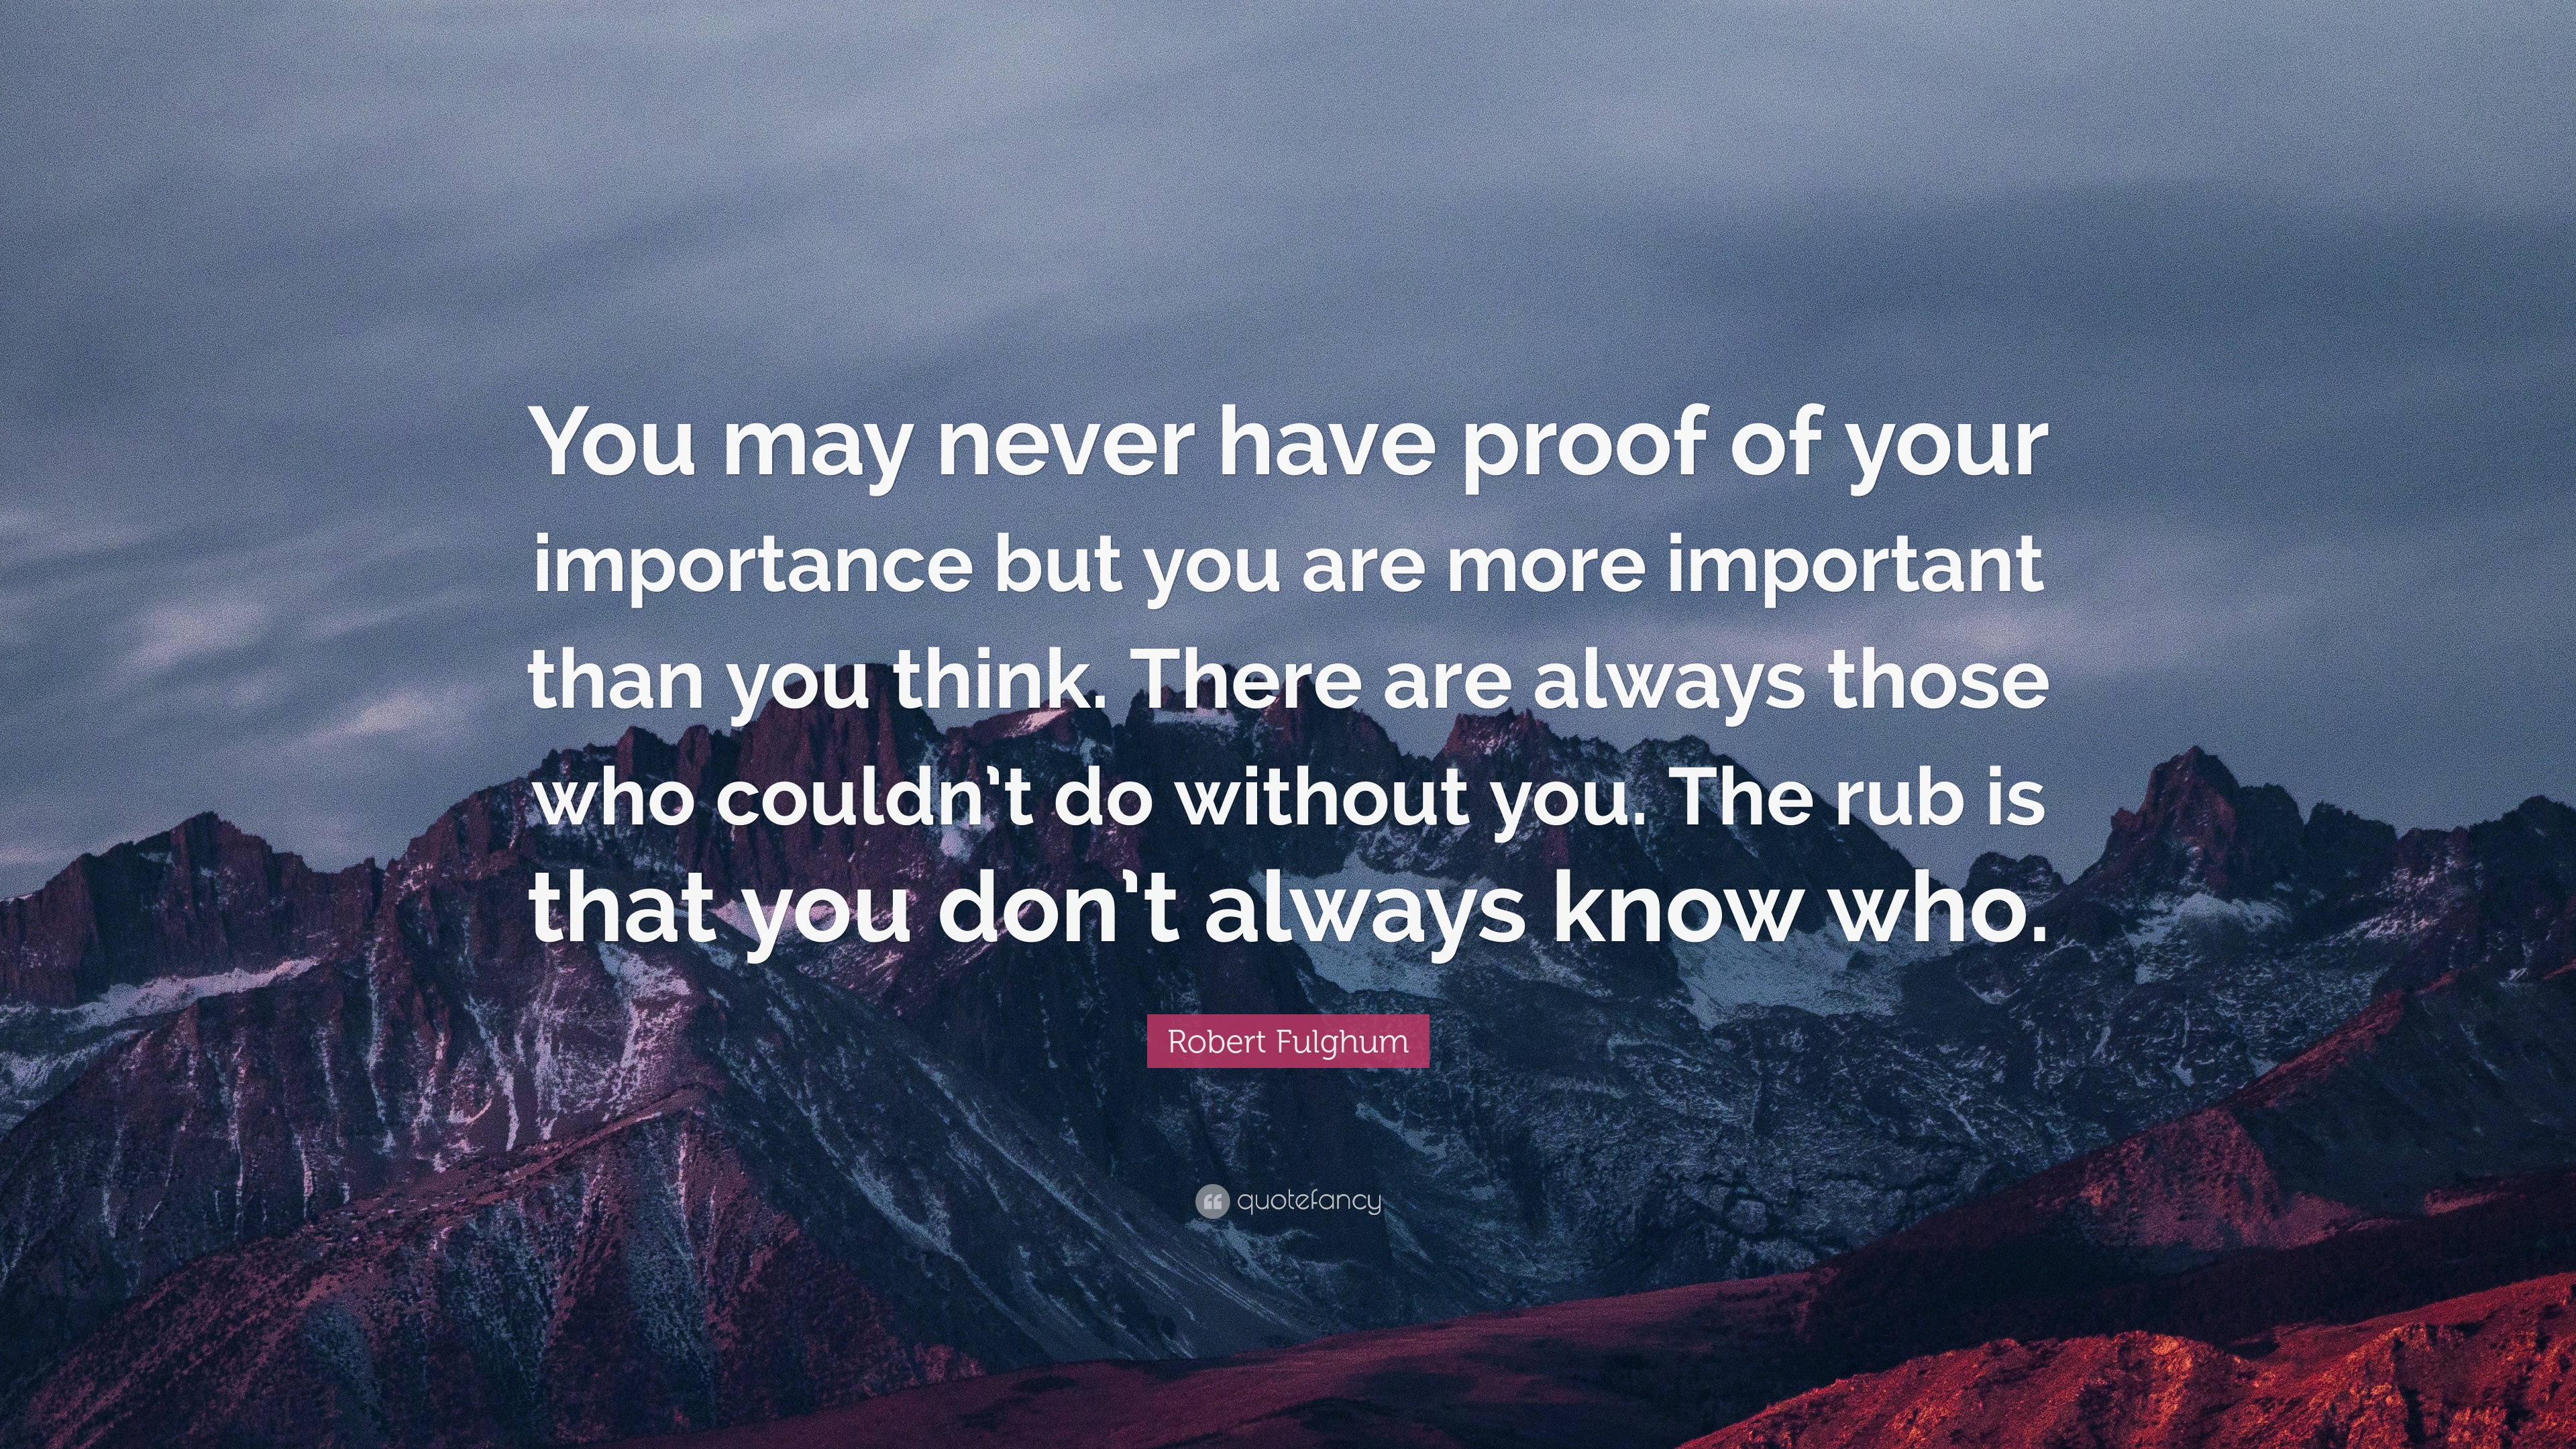 Robert Fulghum Quote: “You may never have proof of your importance but ...